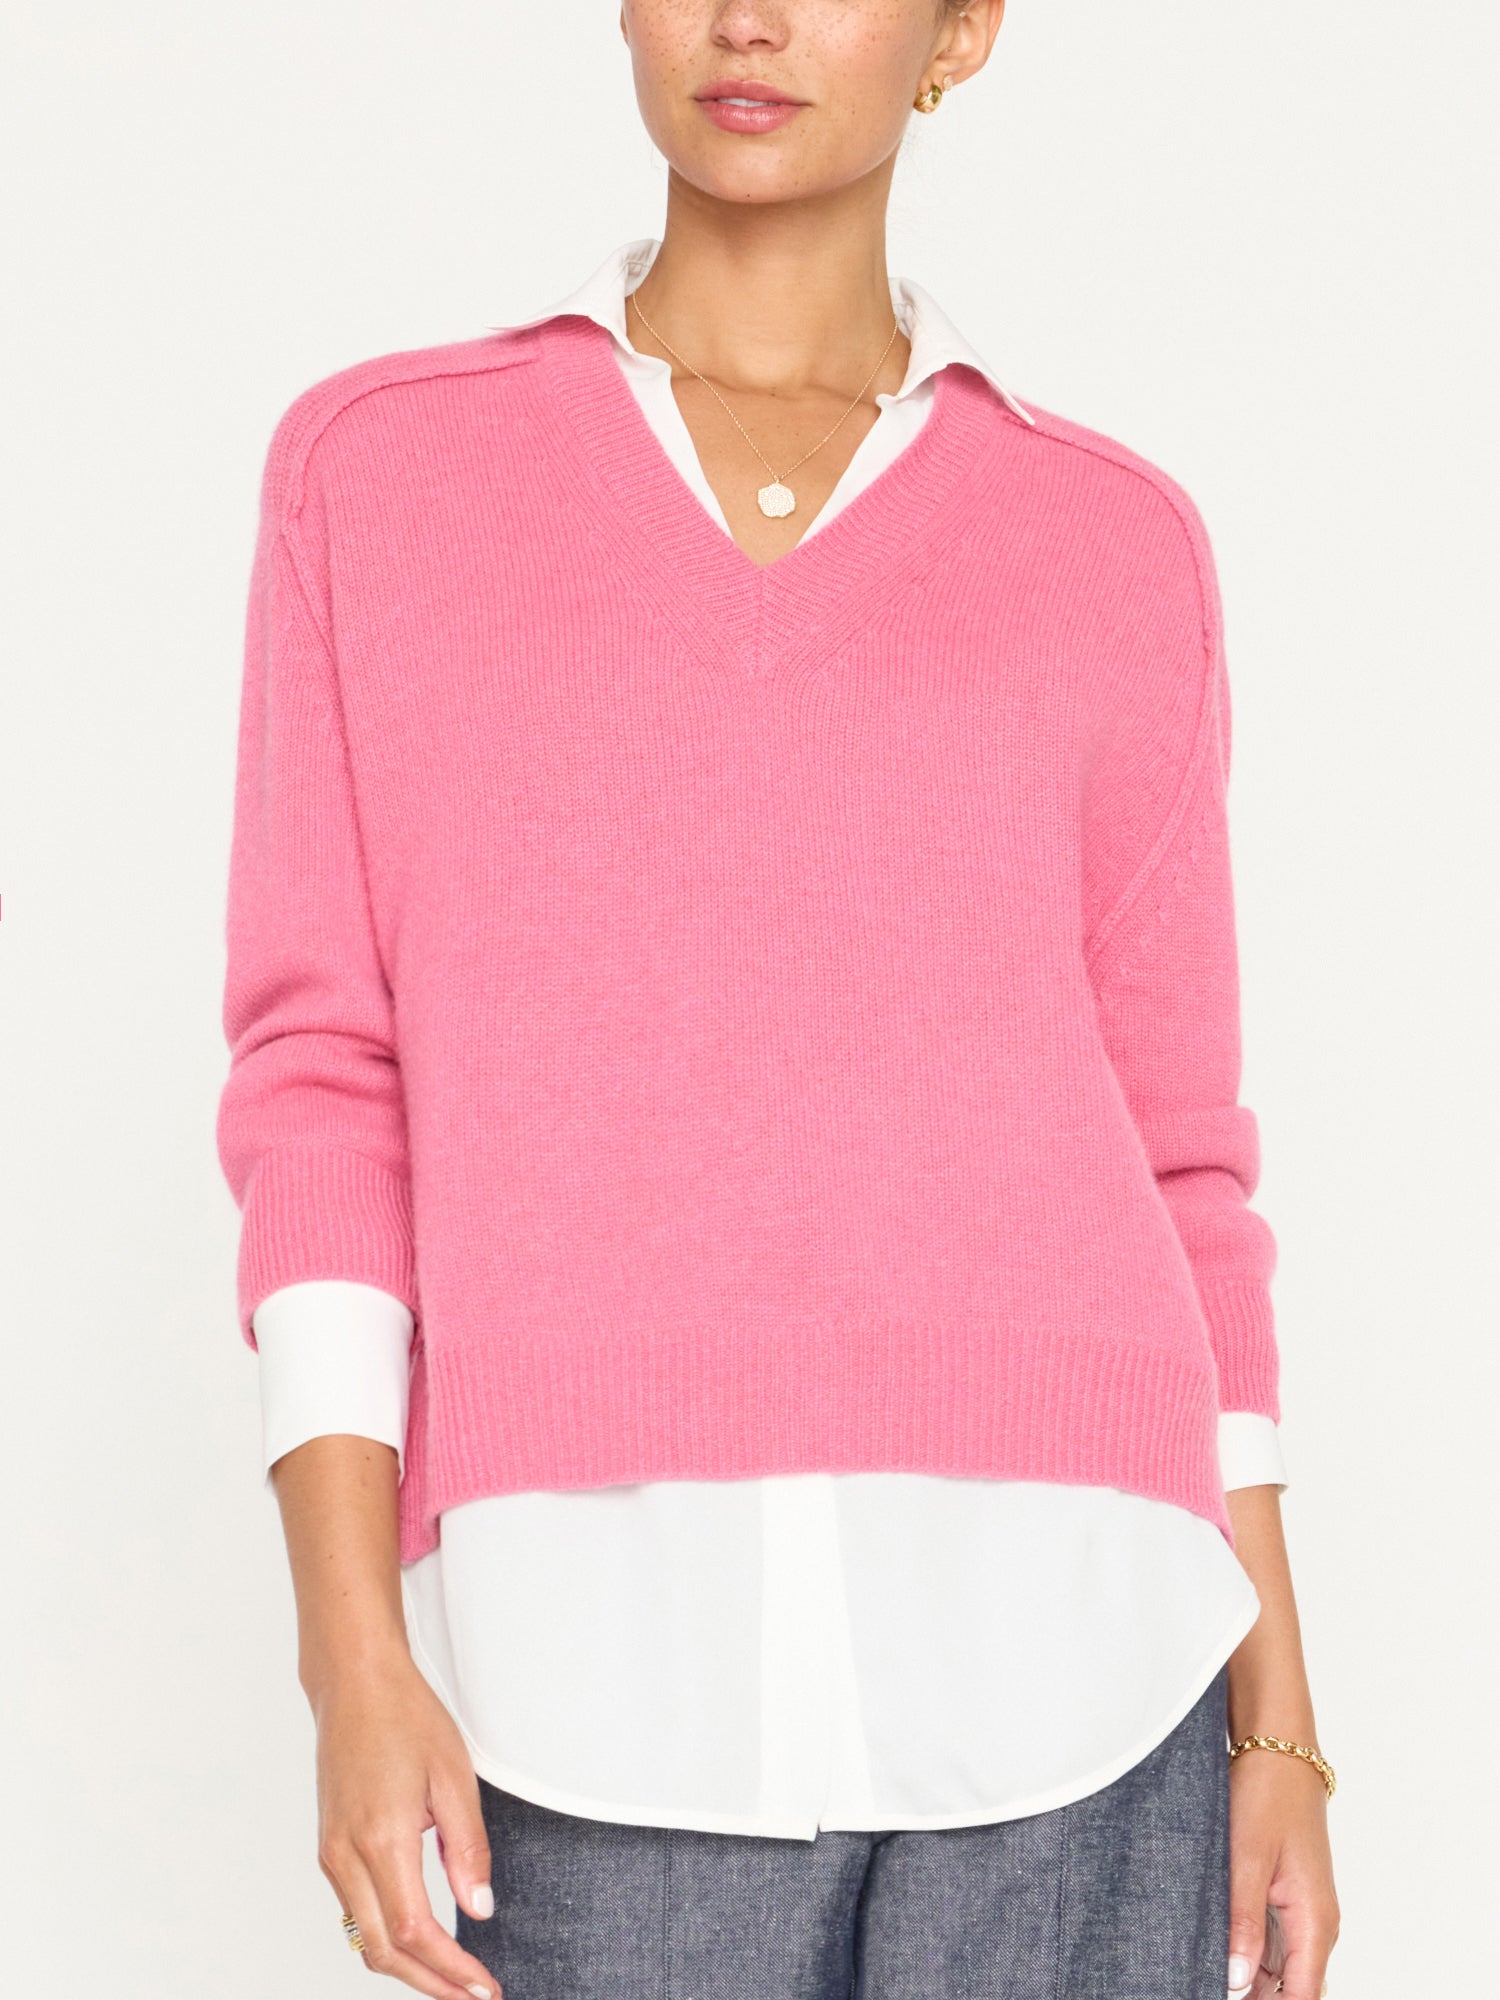 Looker hot pink layered v-neck sweater front view 2